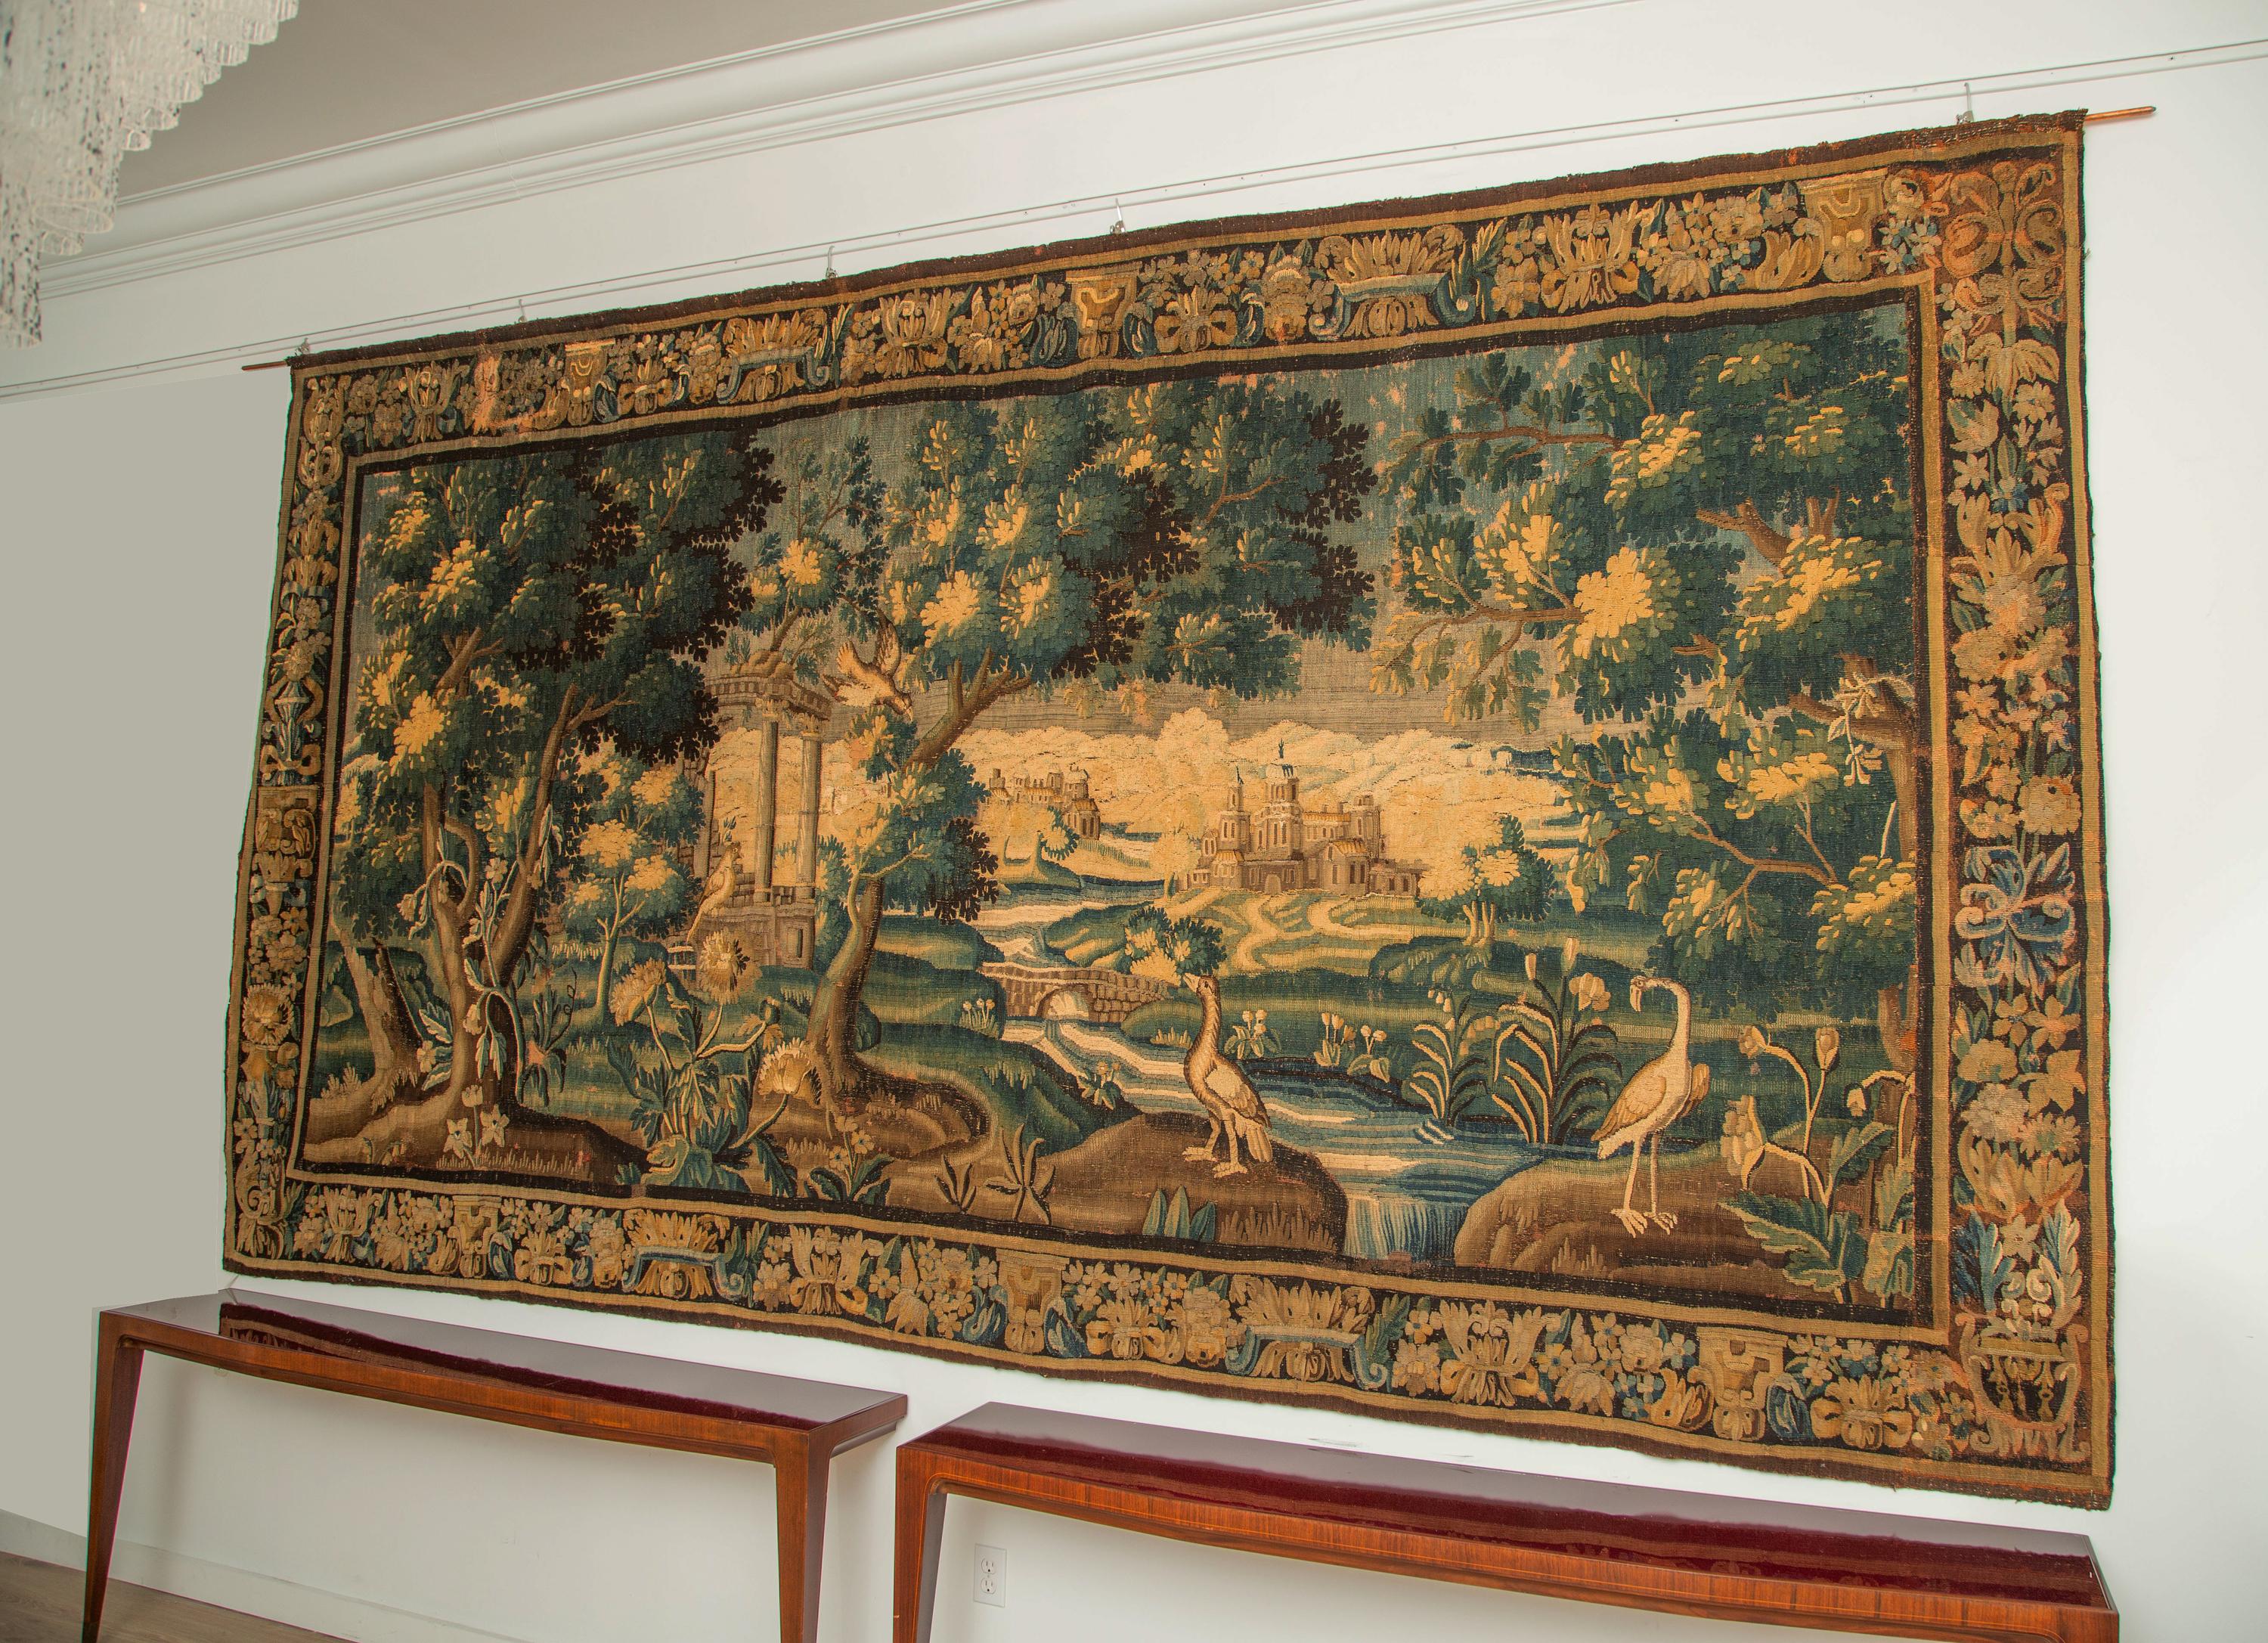 Monumental wool tapestry verdure scenery with herons and fowl in a river landscape with a village in the distance. Lined and mounted with hanging loops. Great overall condition, vivid colors and great details.